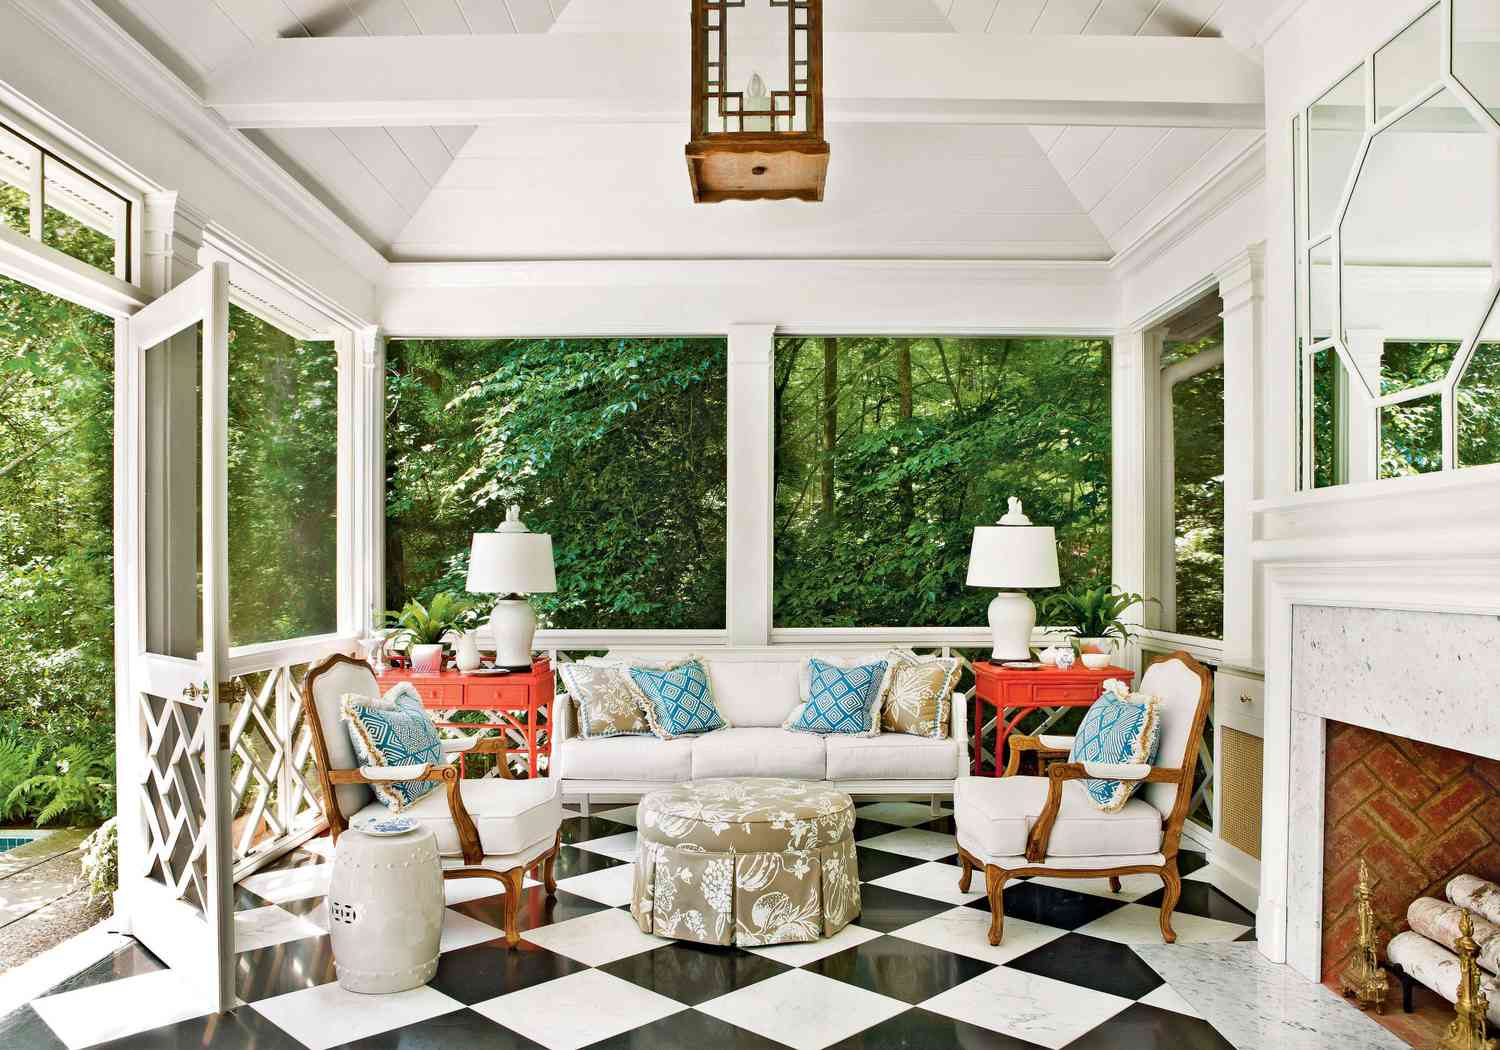 What Is The Best Flooring For Screened Porch